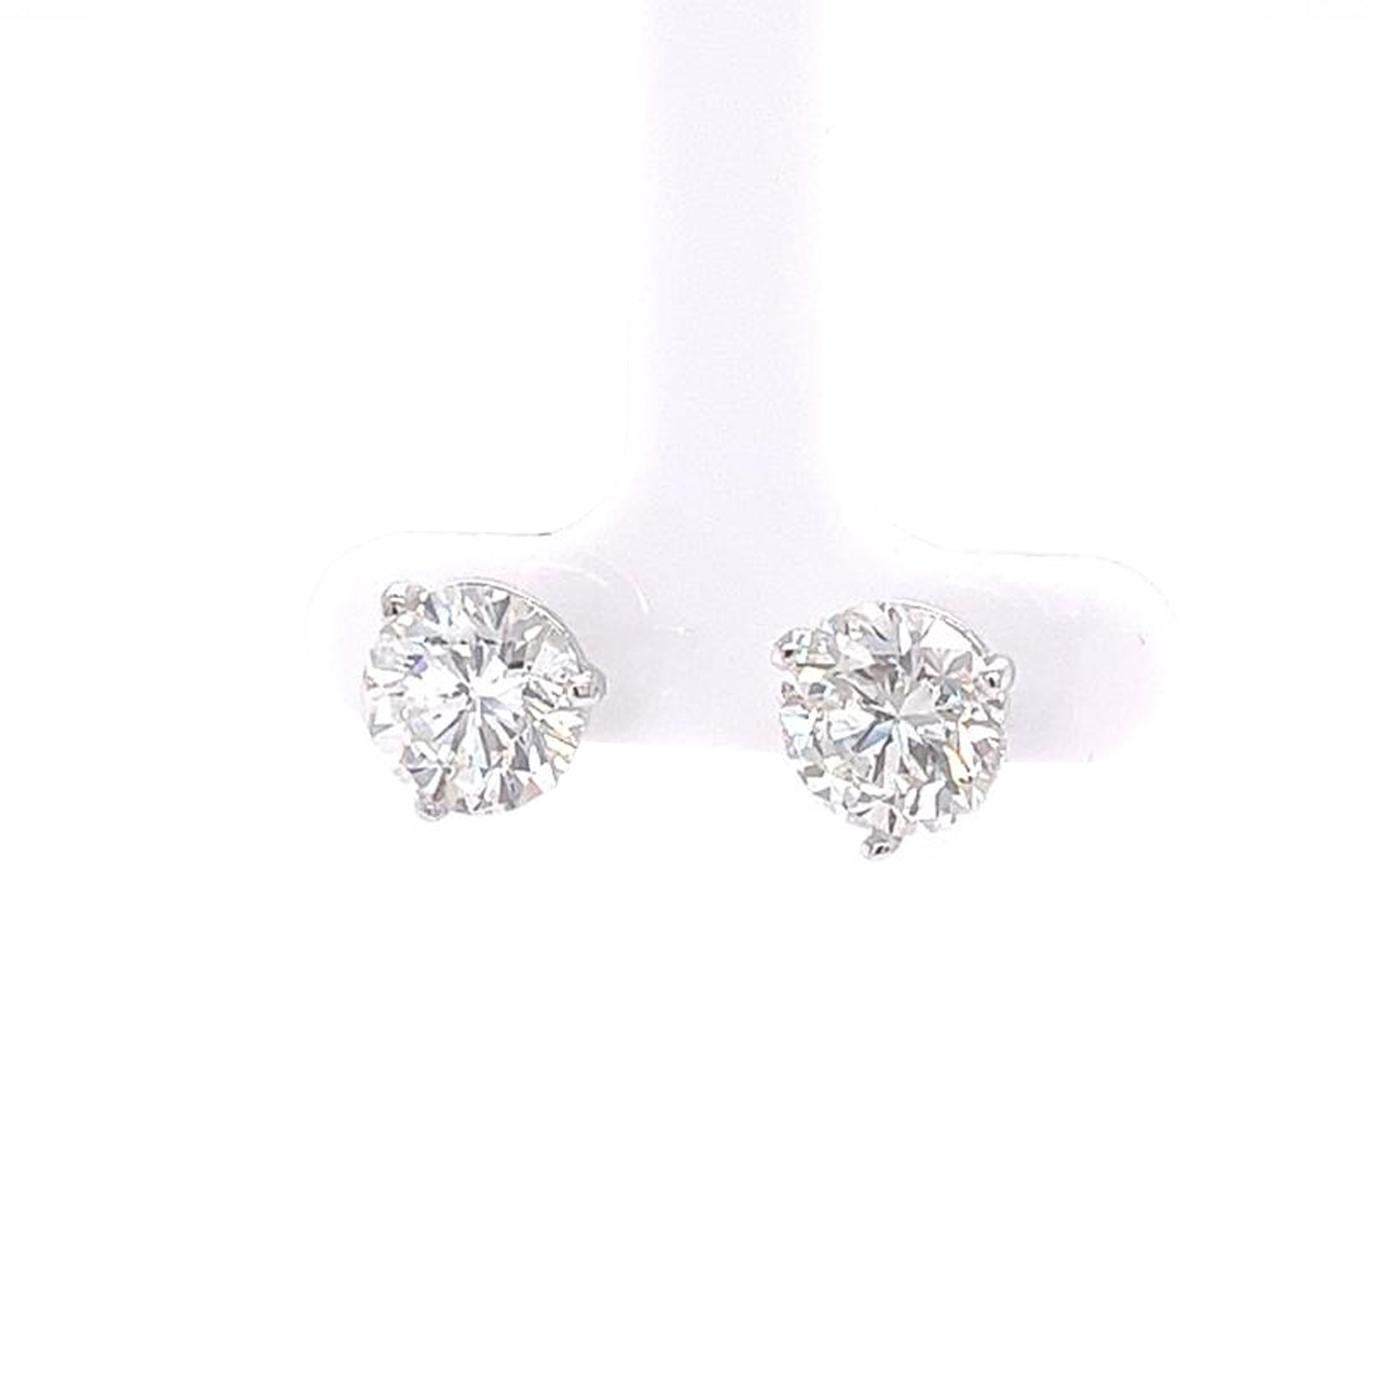 Modernist 5.19ct Round Natural Diamonds Martini Setting 3 Prong Studs Earrings For Sale